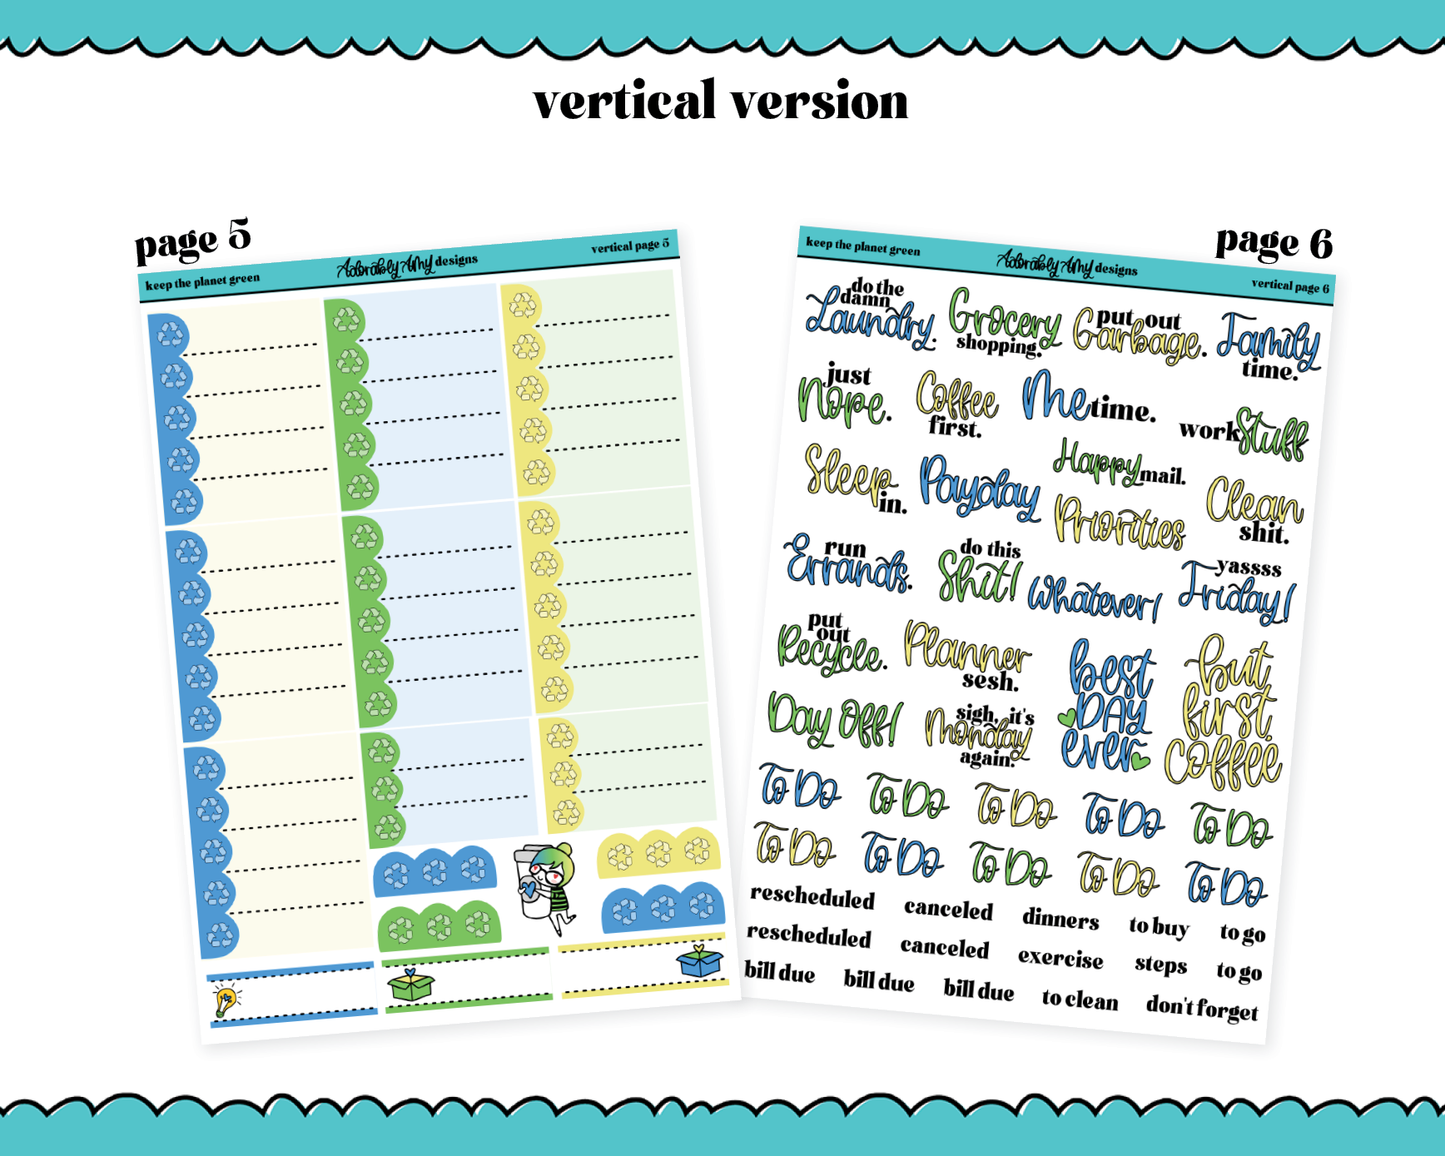 Vertical Keep the Planet Green Watercolor Planner Sticker Kit for Vertical Standard Size Planners or Inserts